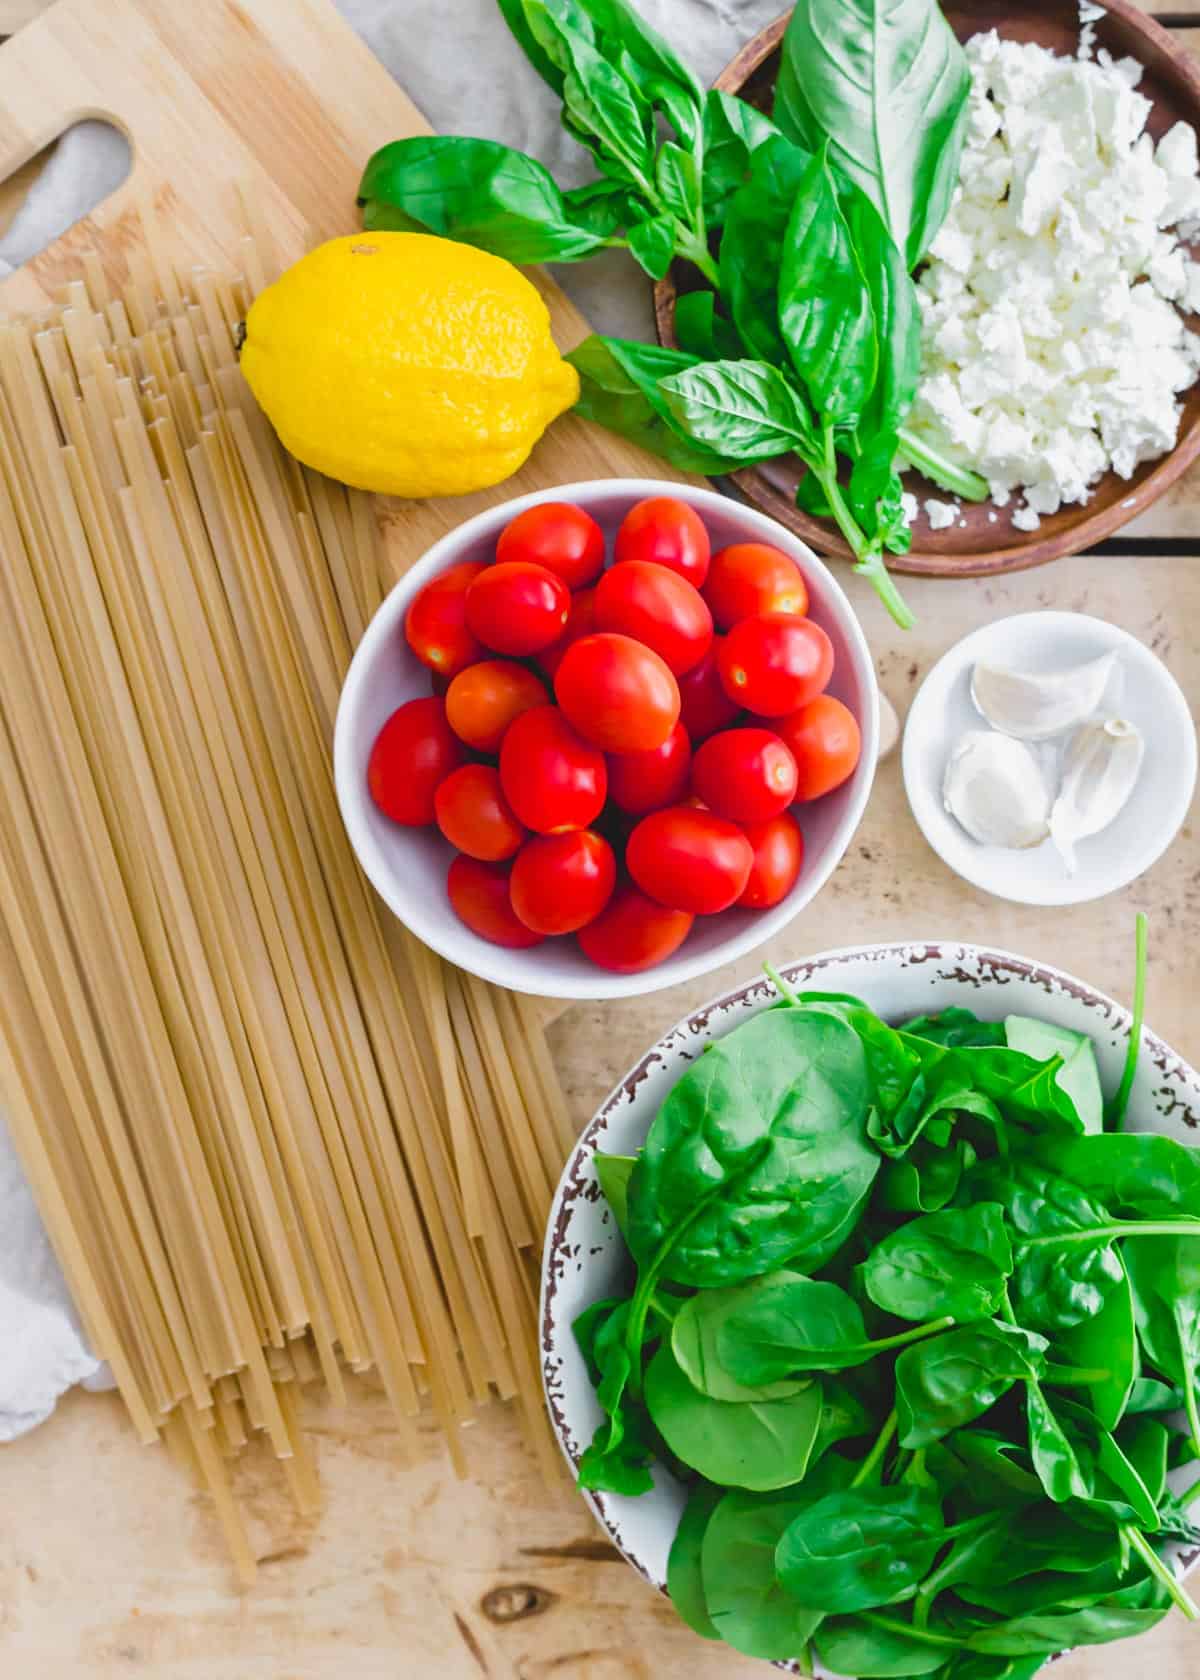 Uncooked linguine, cherry tomatoes, garlic, feta, basil, lemon and baby spinach on a wood surface.